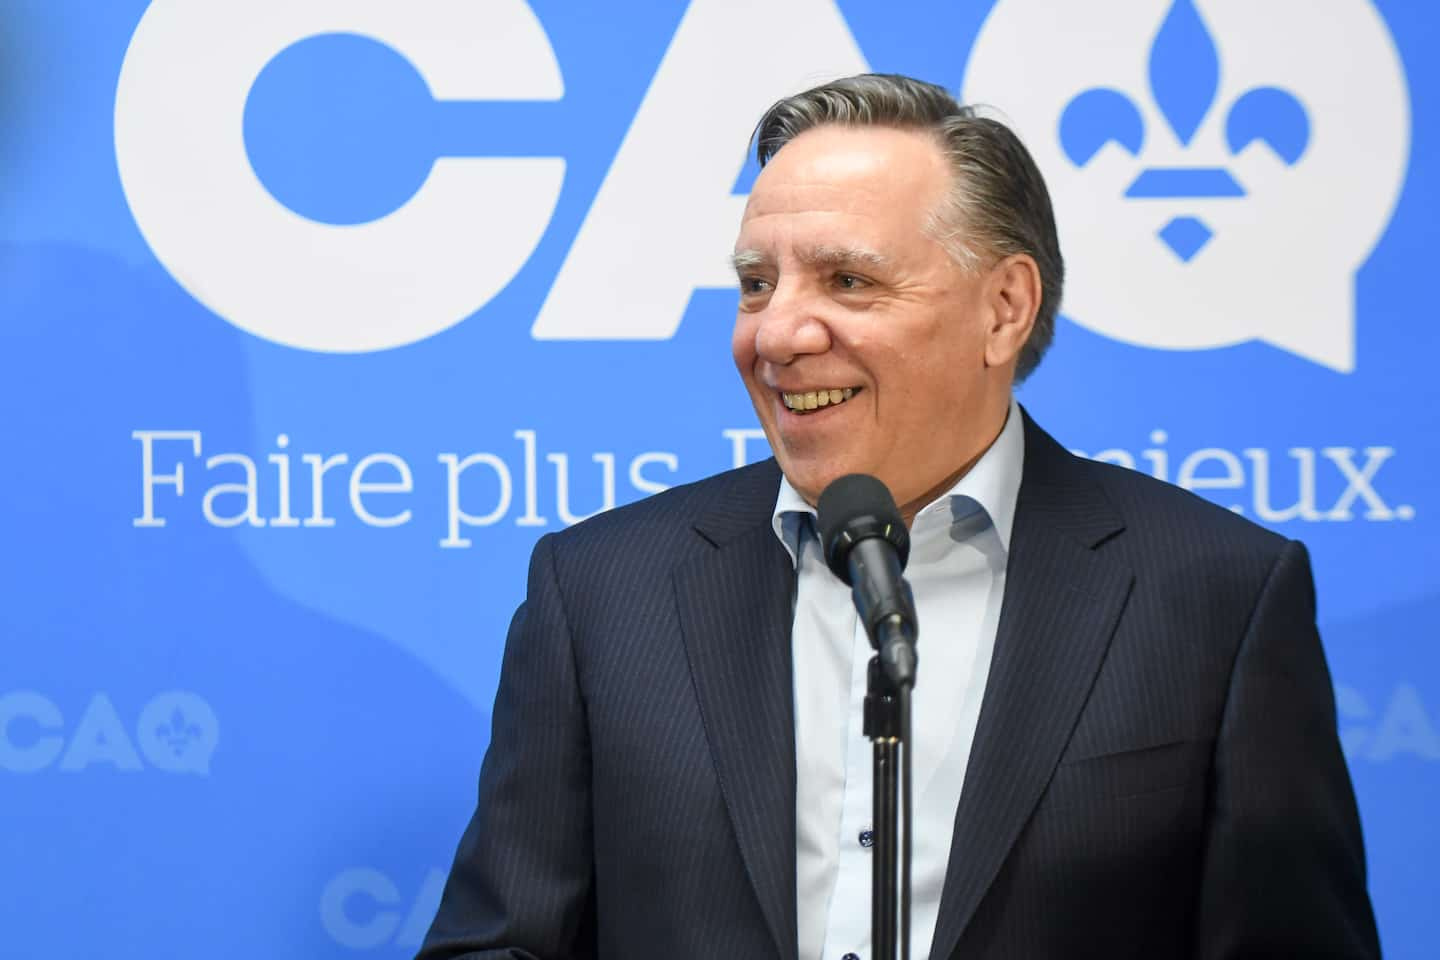 Quebecers recognize themselves in Legault